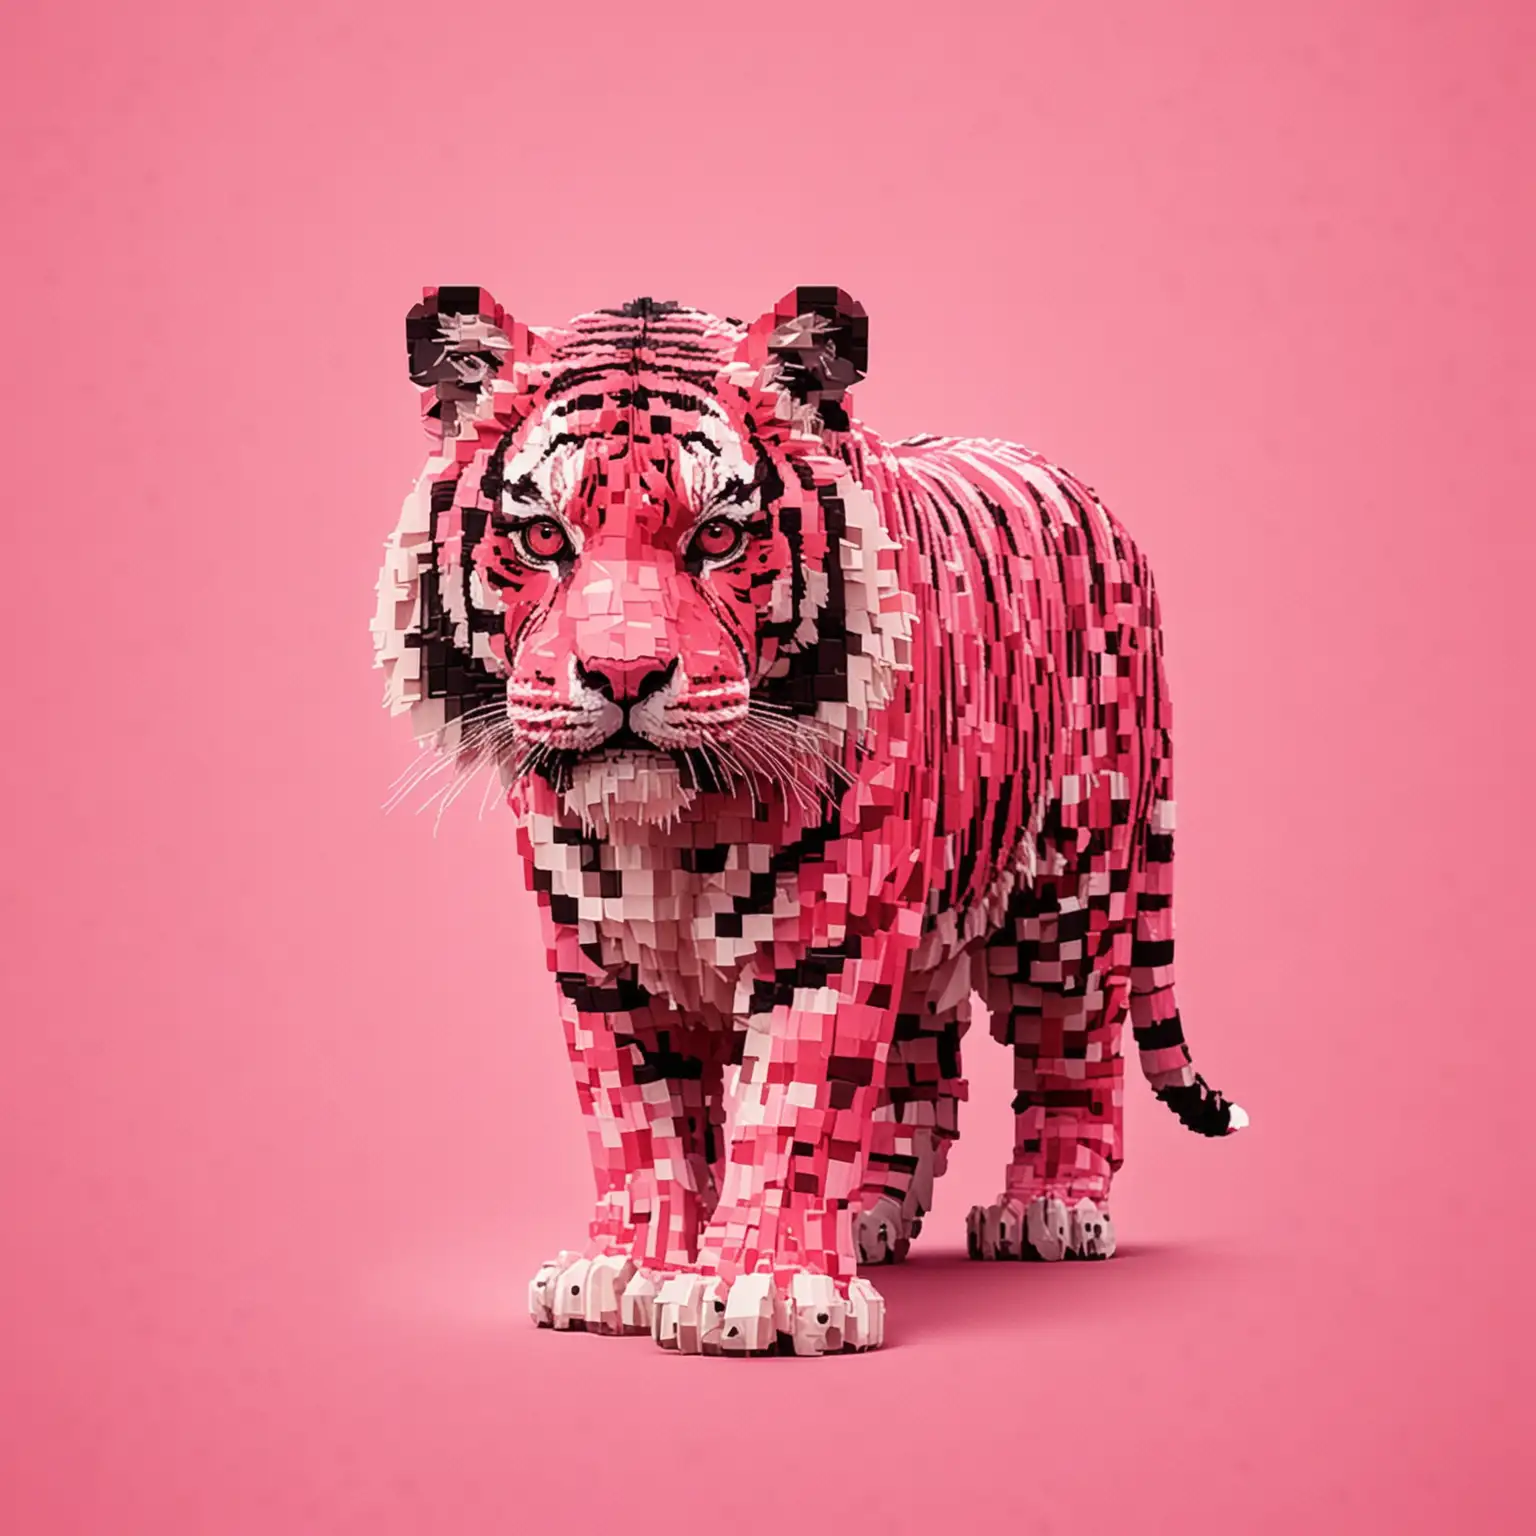 Pixelated Pink Tiger on Vibrant Pink Background